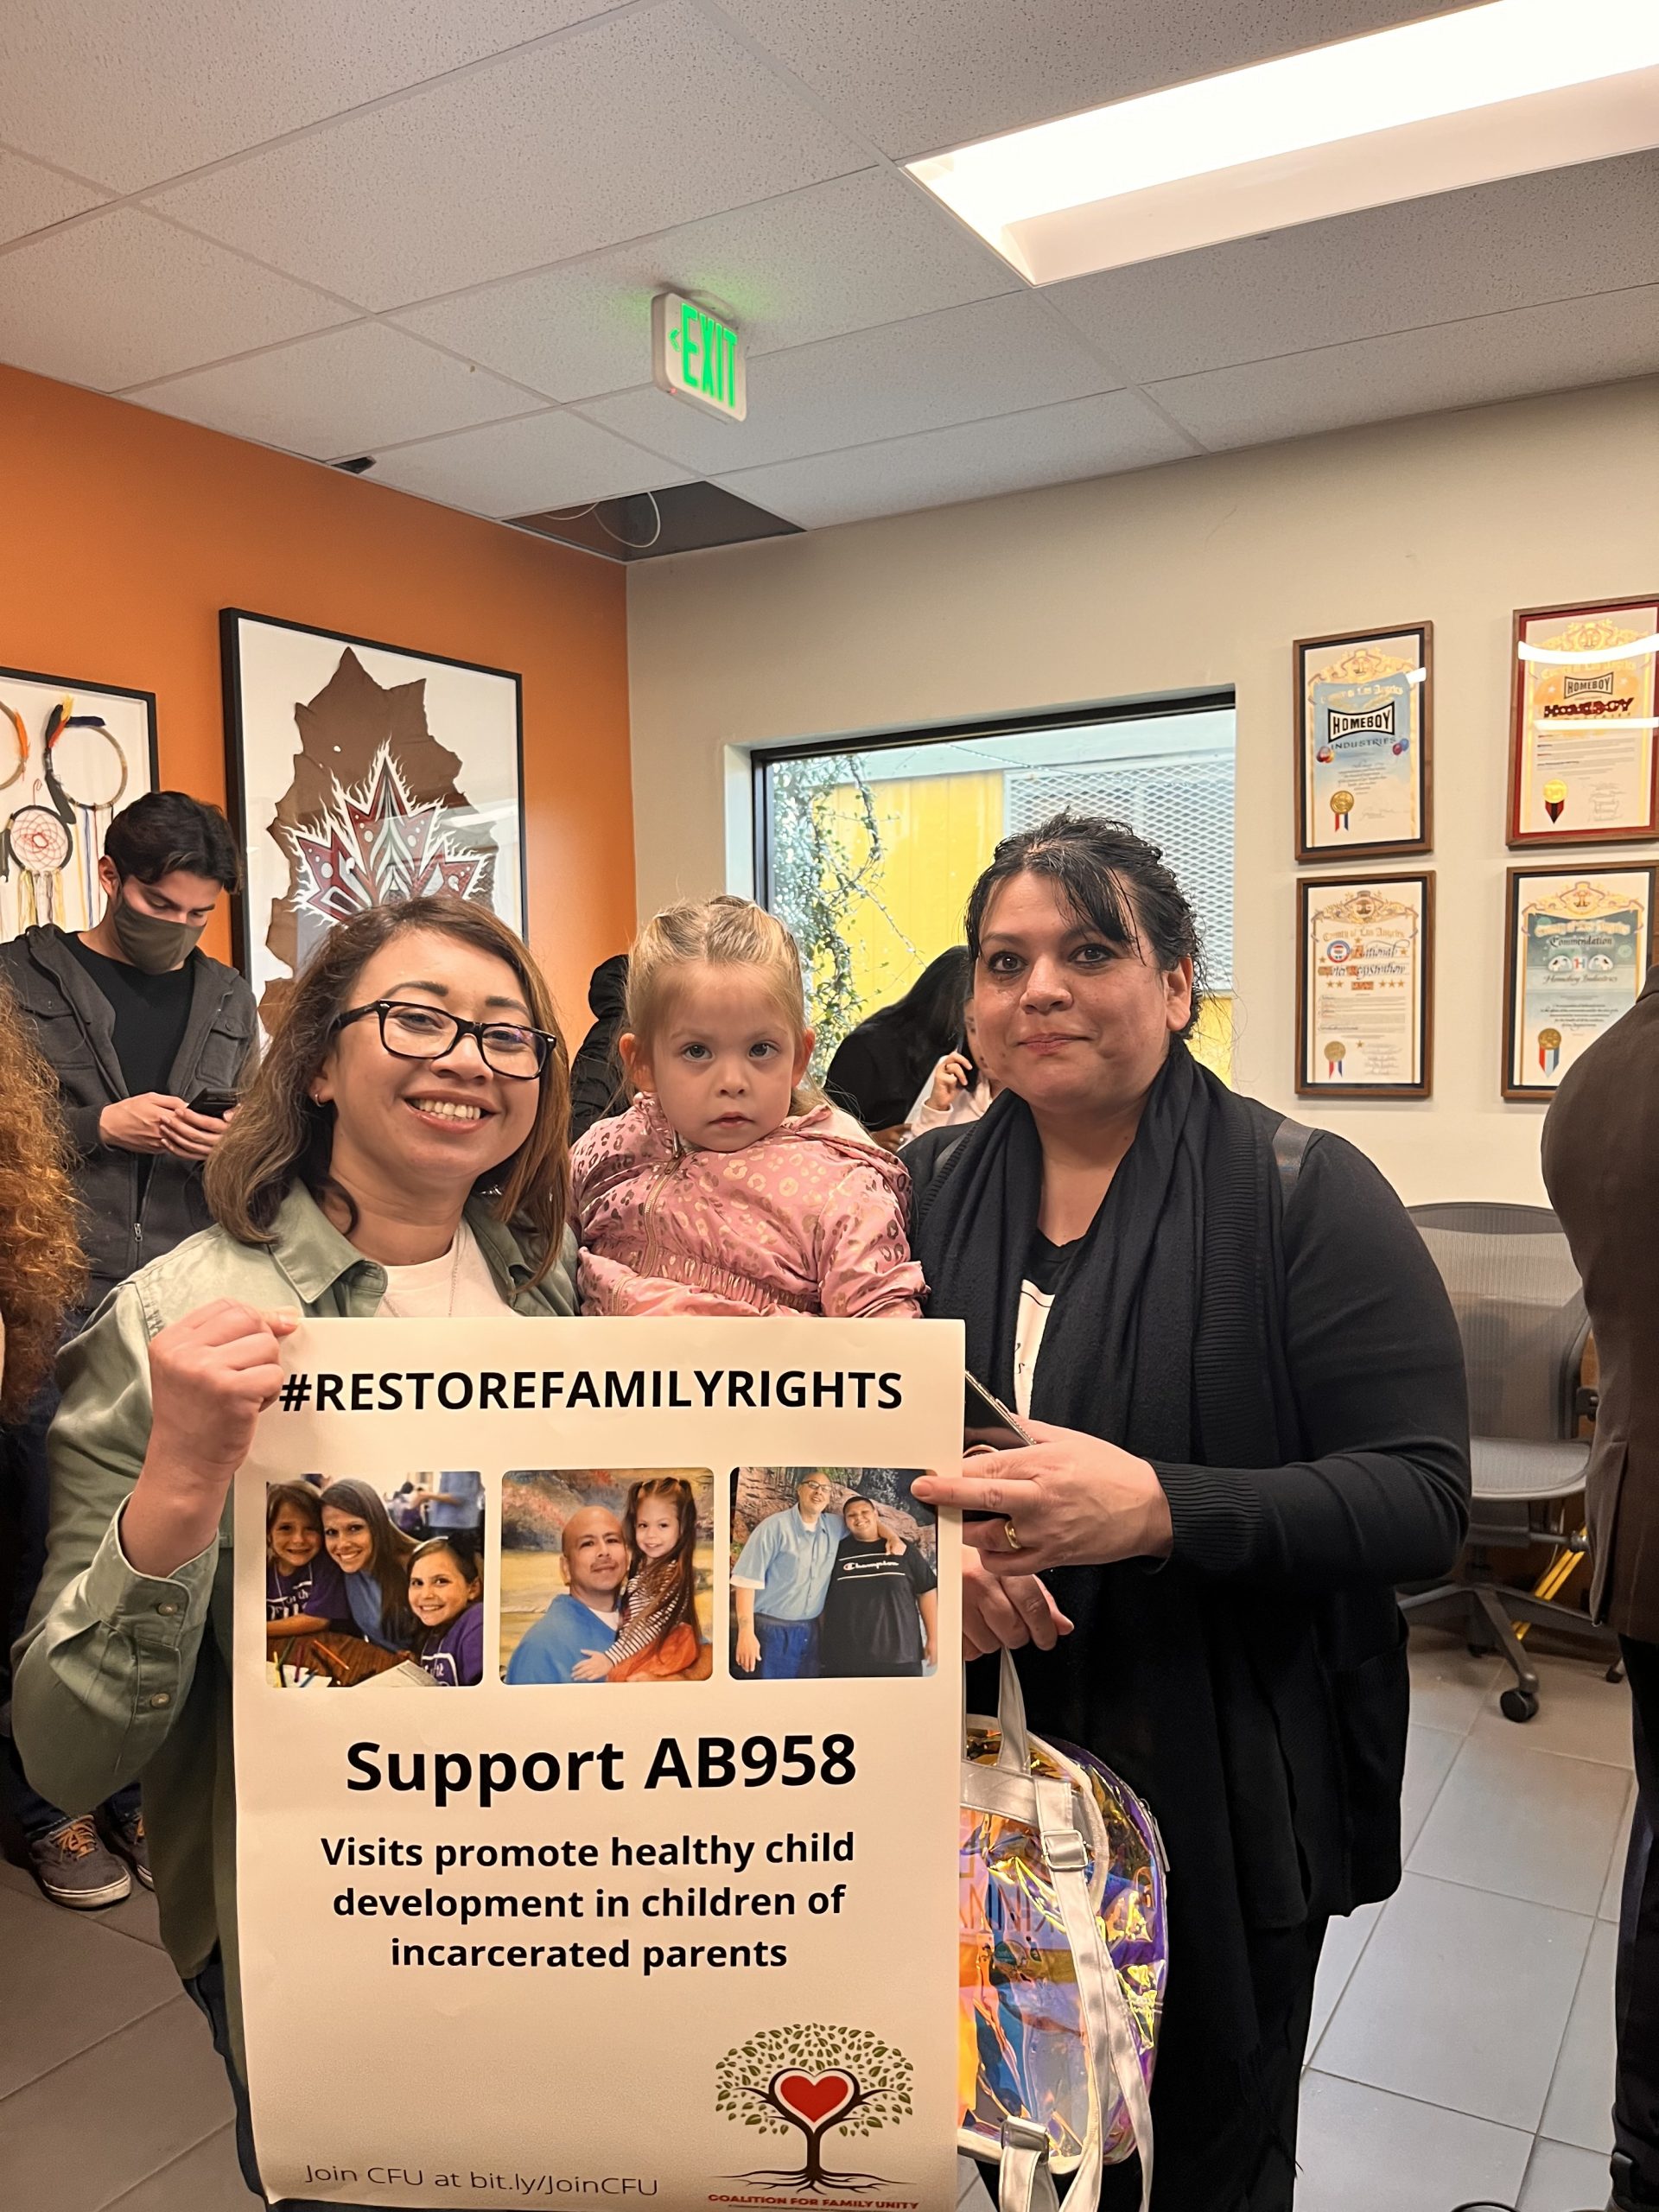 Family Unity Coordinator Ivana Cortez with the Executive Director of Jesse’s Place, Sandra Suares, and her daughter, Zoe Suares at the AB 958 Press Conference Los Angeles. Sandra and Zoe are system-impacted family members and visited Zoe's dad at a California prison for 14.5 years until his release in 2023.